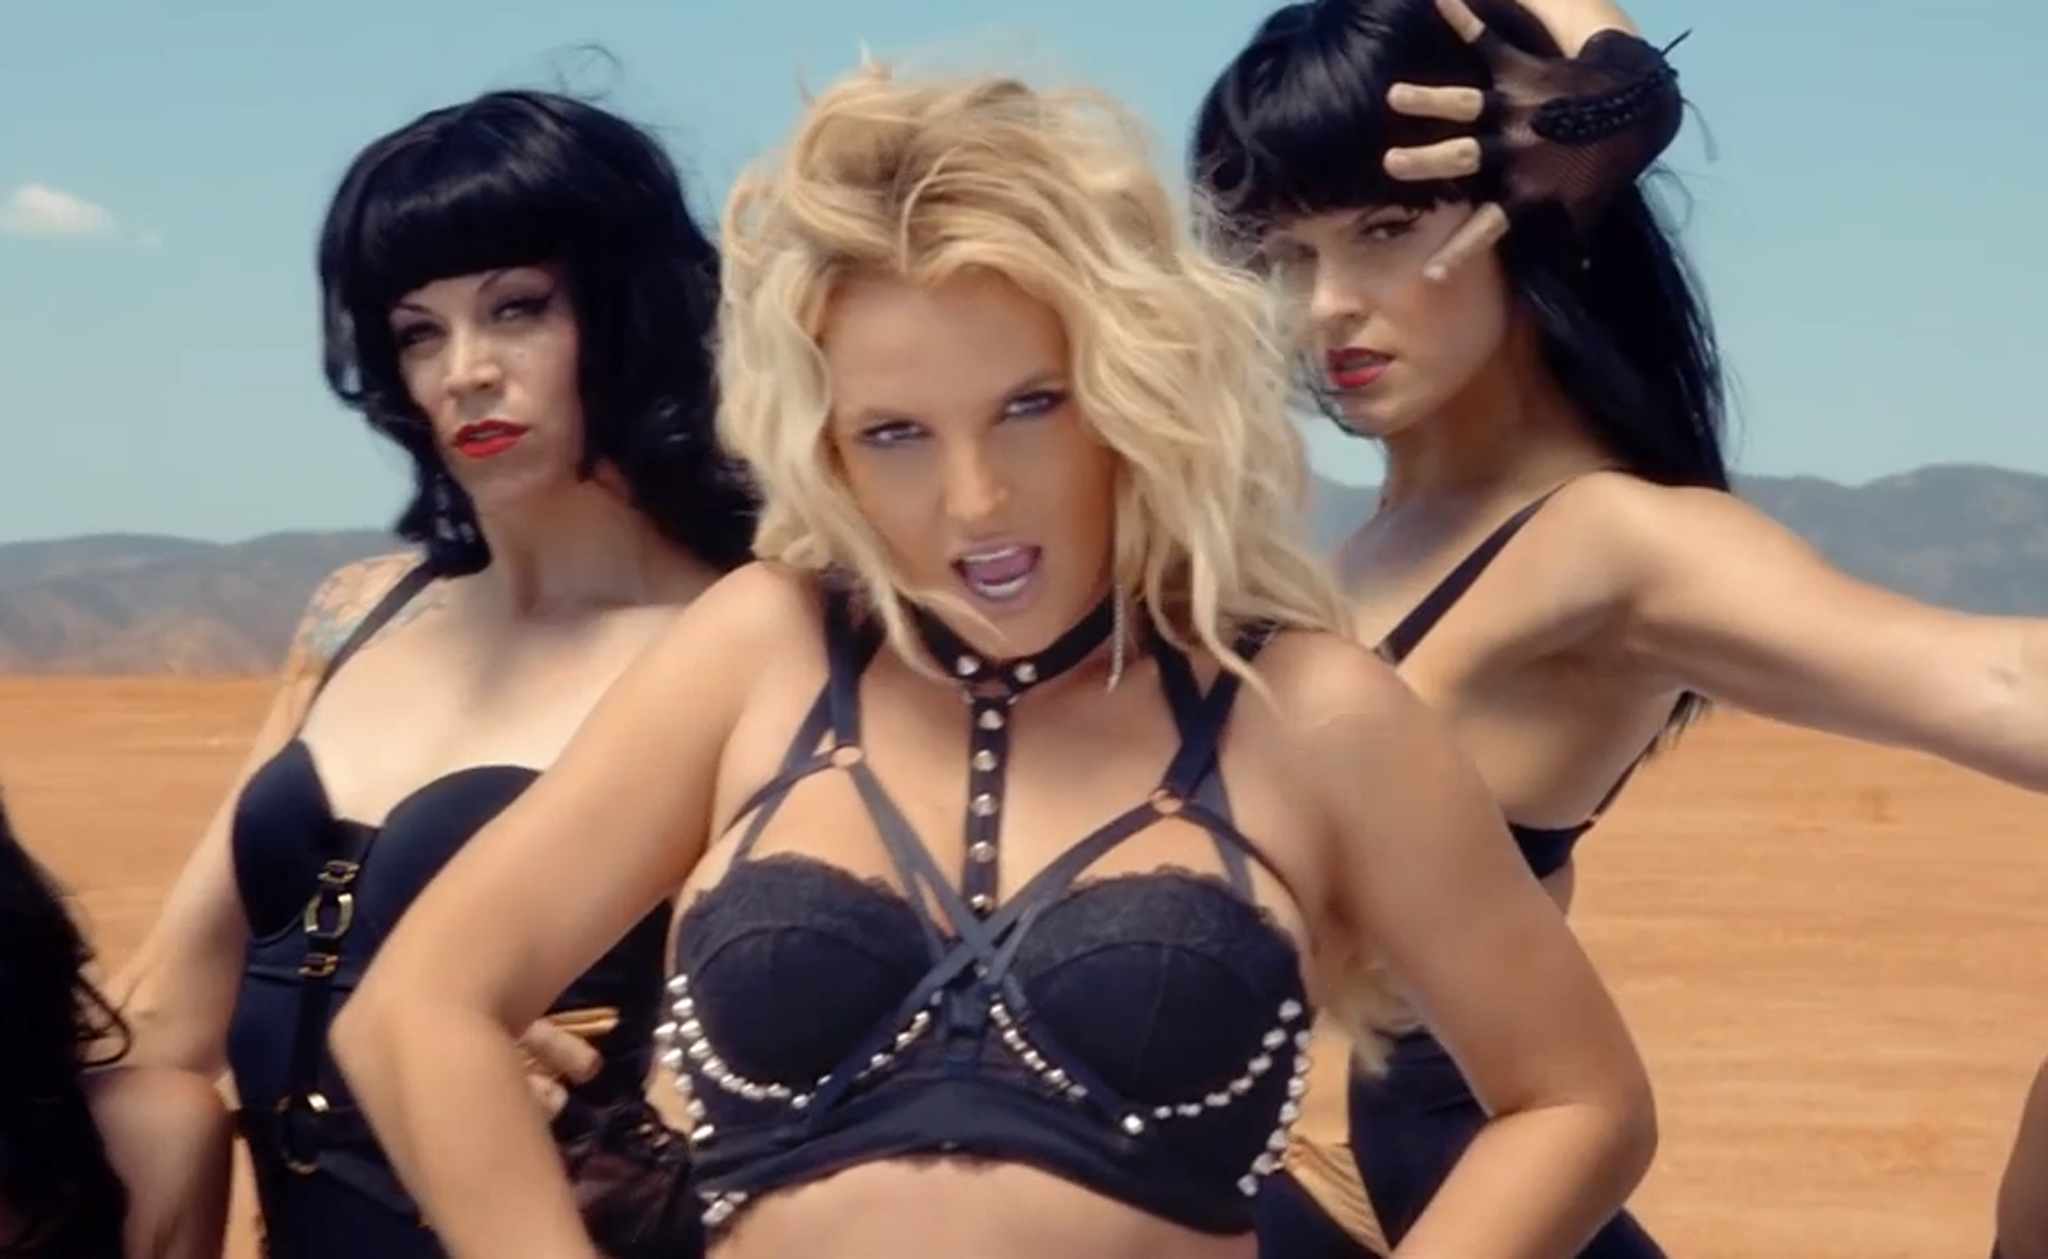 Britney Spears in her music video for "Work B***c"